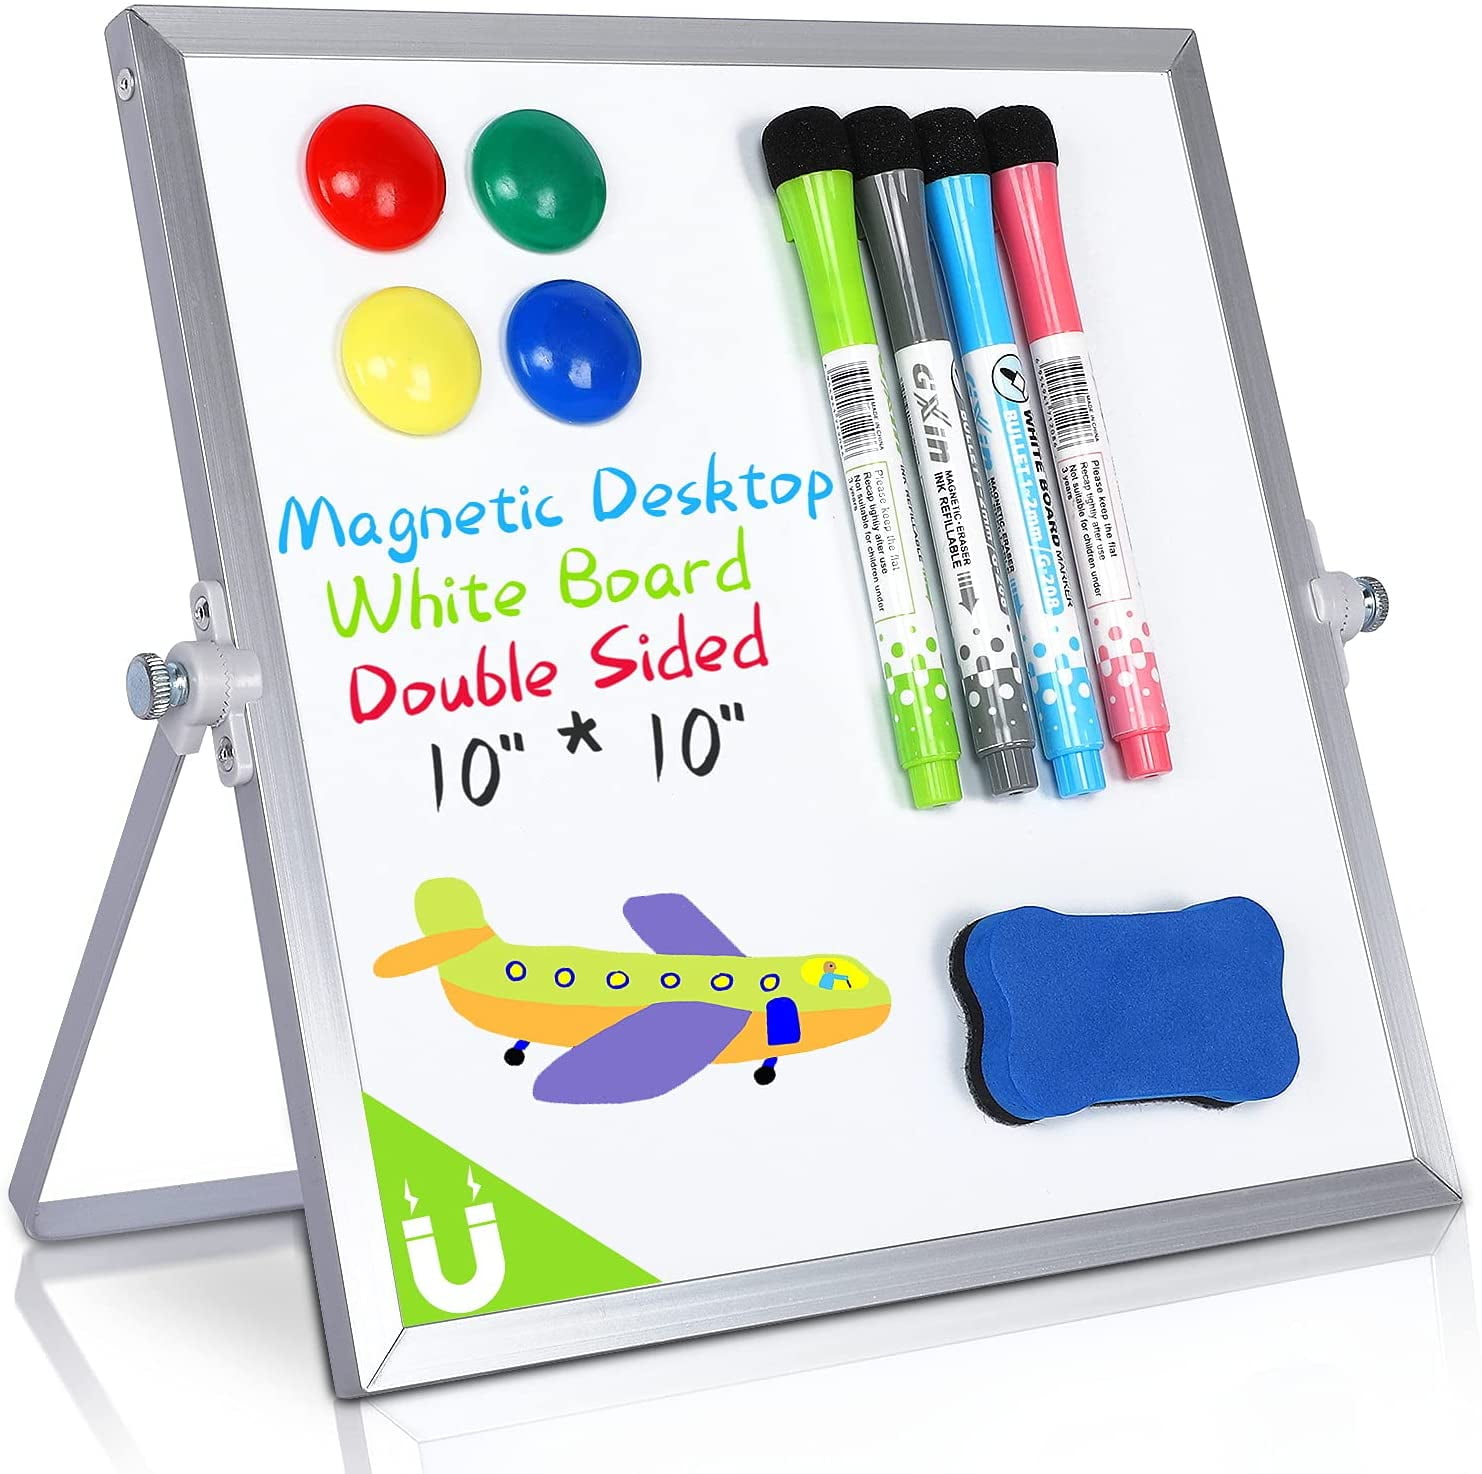 WHITEBOARD FOR CHILDREN KIDS DRYWIPE CLEAN MAGNETIC BACK FUN MESSAGE BOARD HOME 